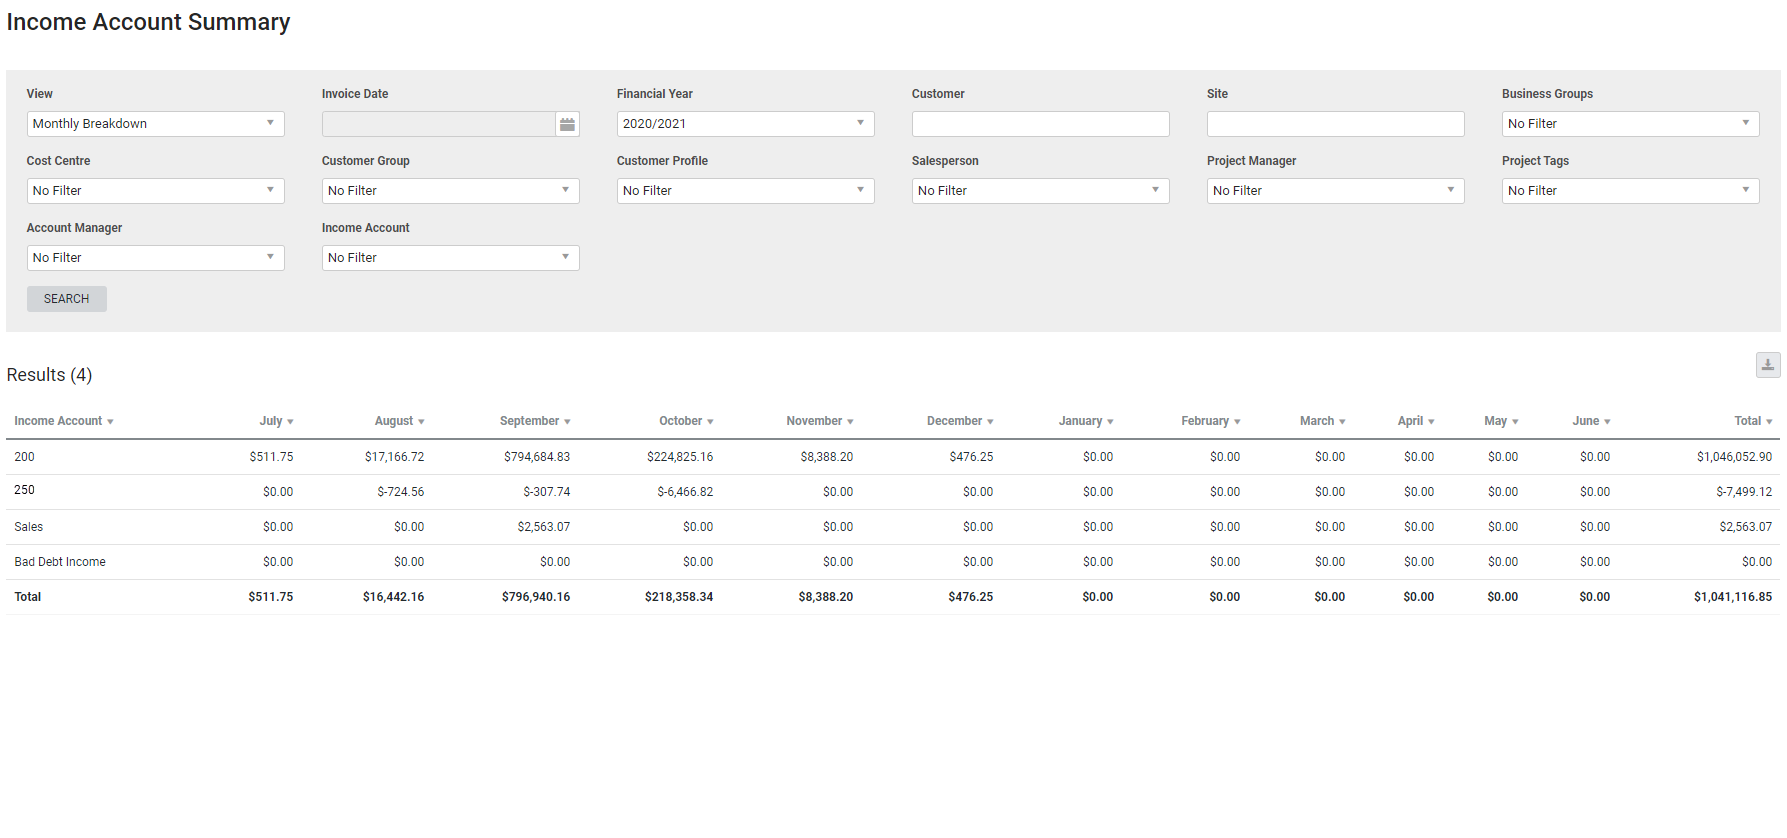 A screenshot of the Income Invoice Summary report.